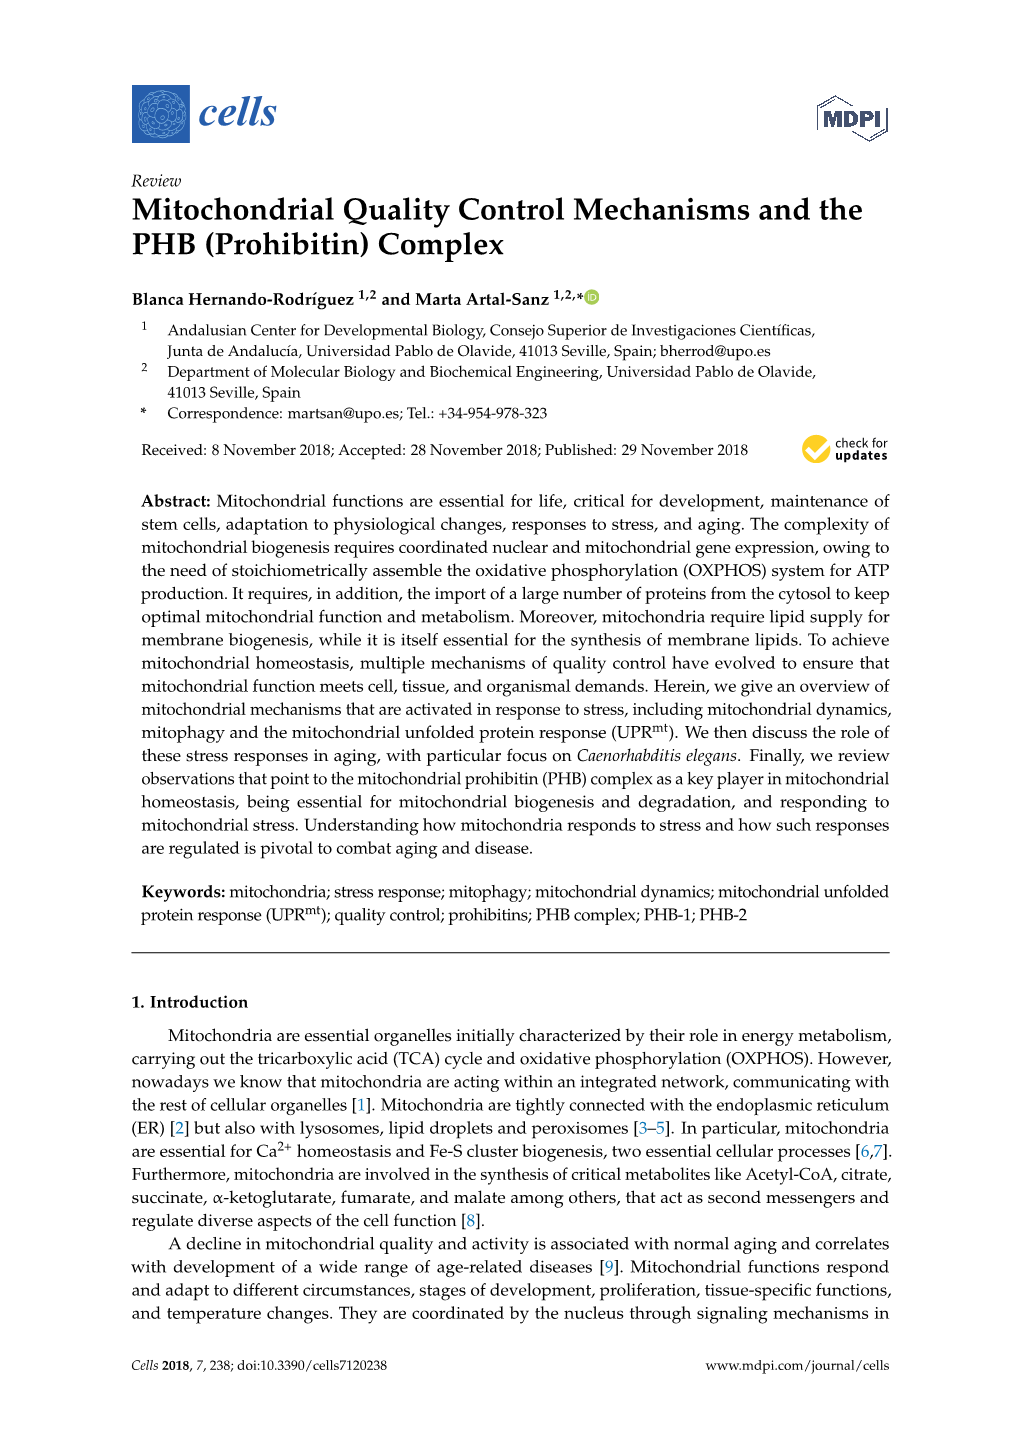 Mitochondrial Quality Control Mechanisms and the PHB (Prohibitin) Complex